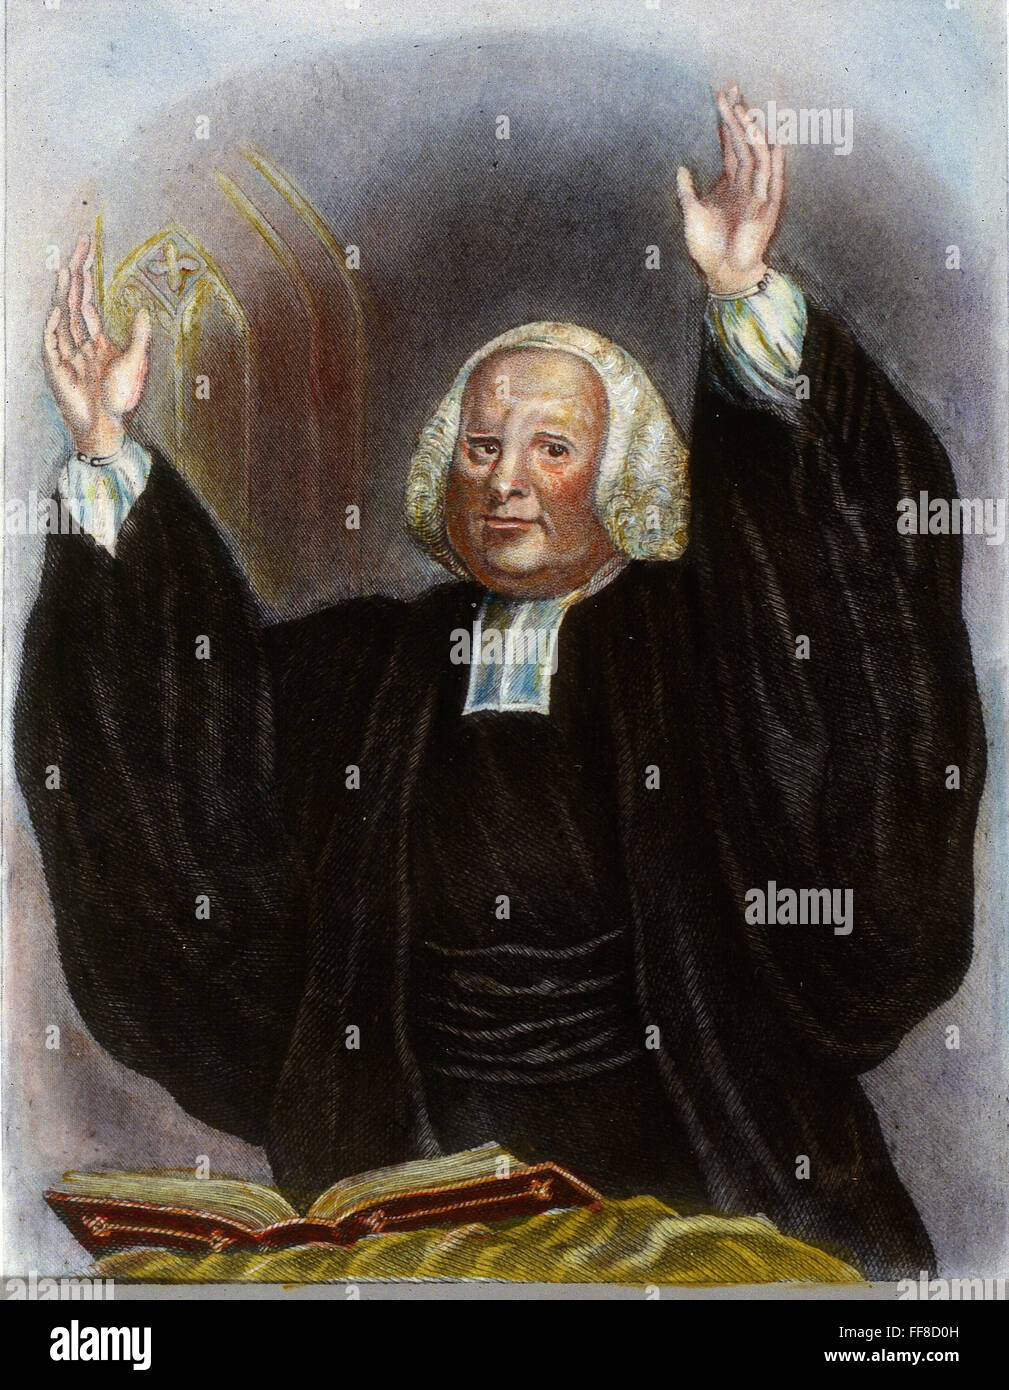 GEORGE WHITEFIELD /n(1714-1770). English preacher. Steel engraving, American, 19th century, after a painting, c1768, by Nathaniel Hone. Stock Photo